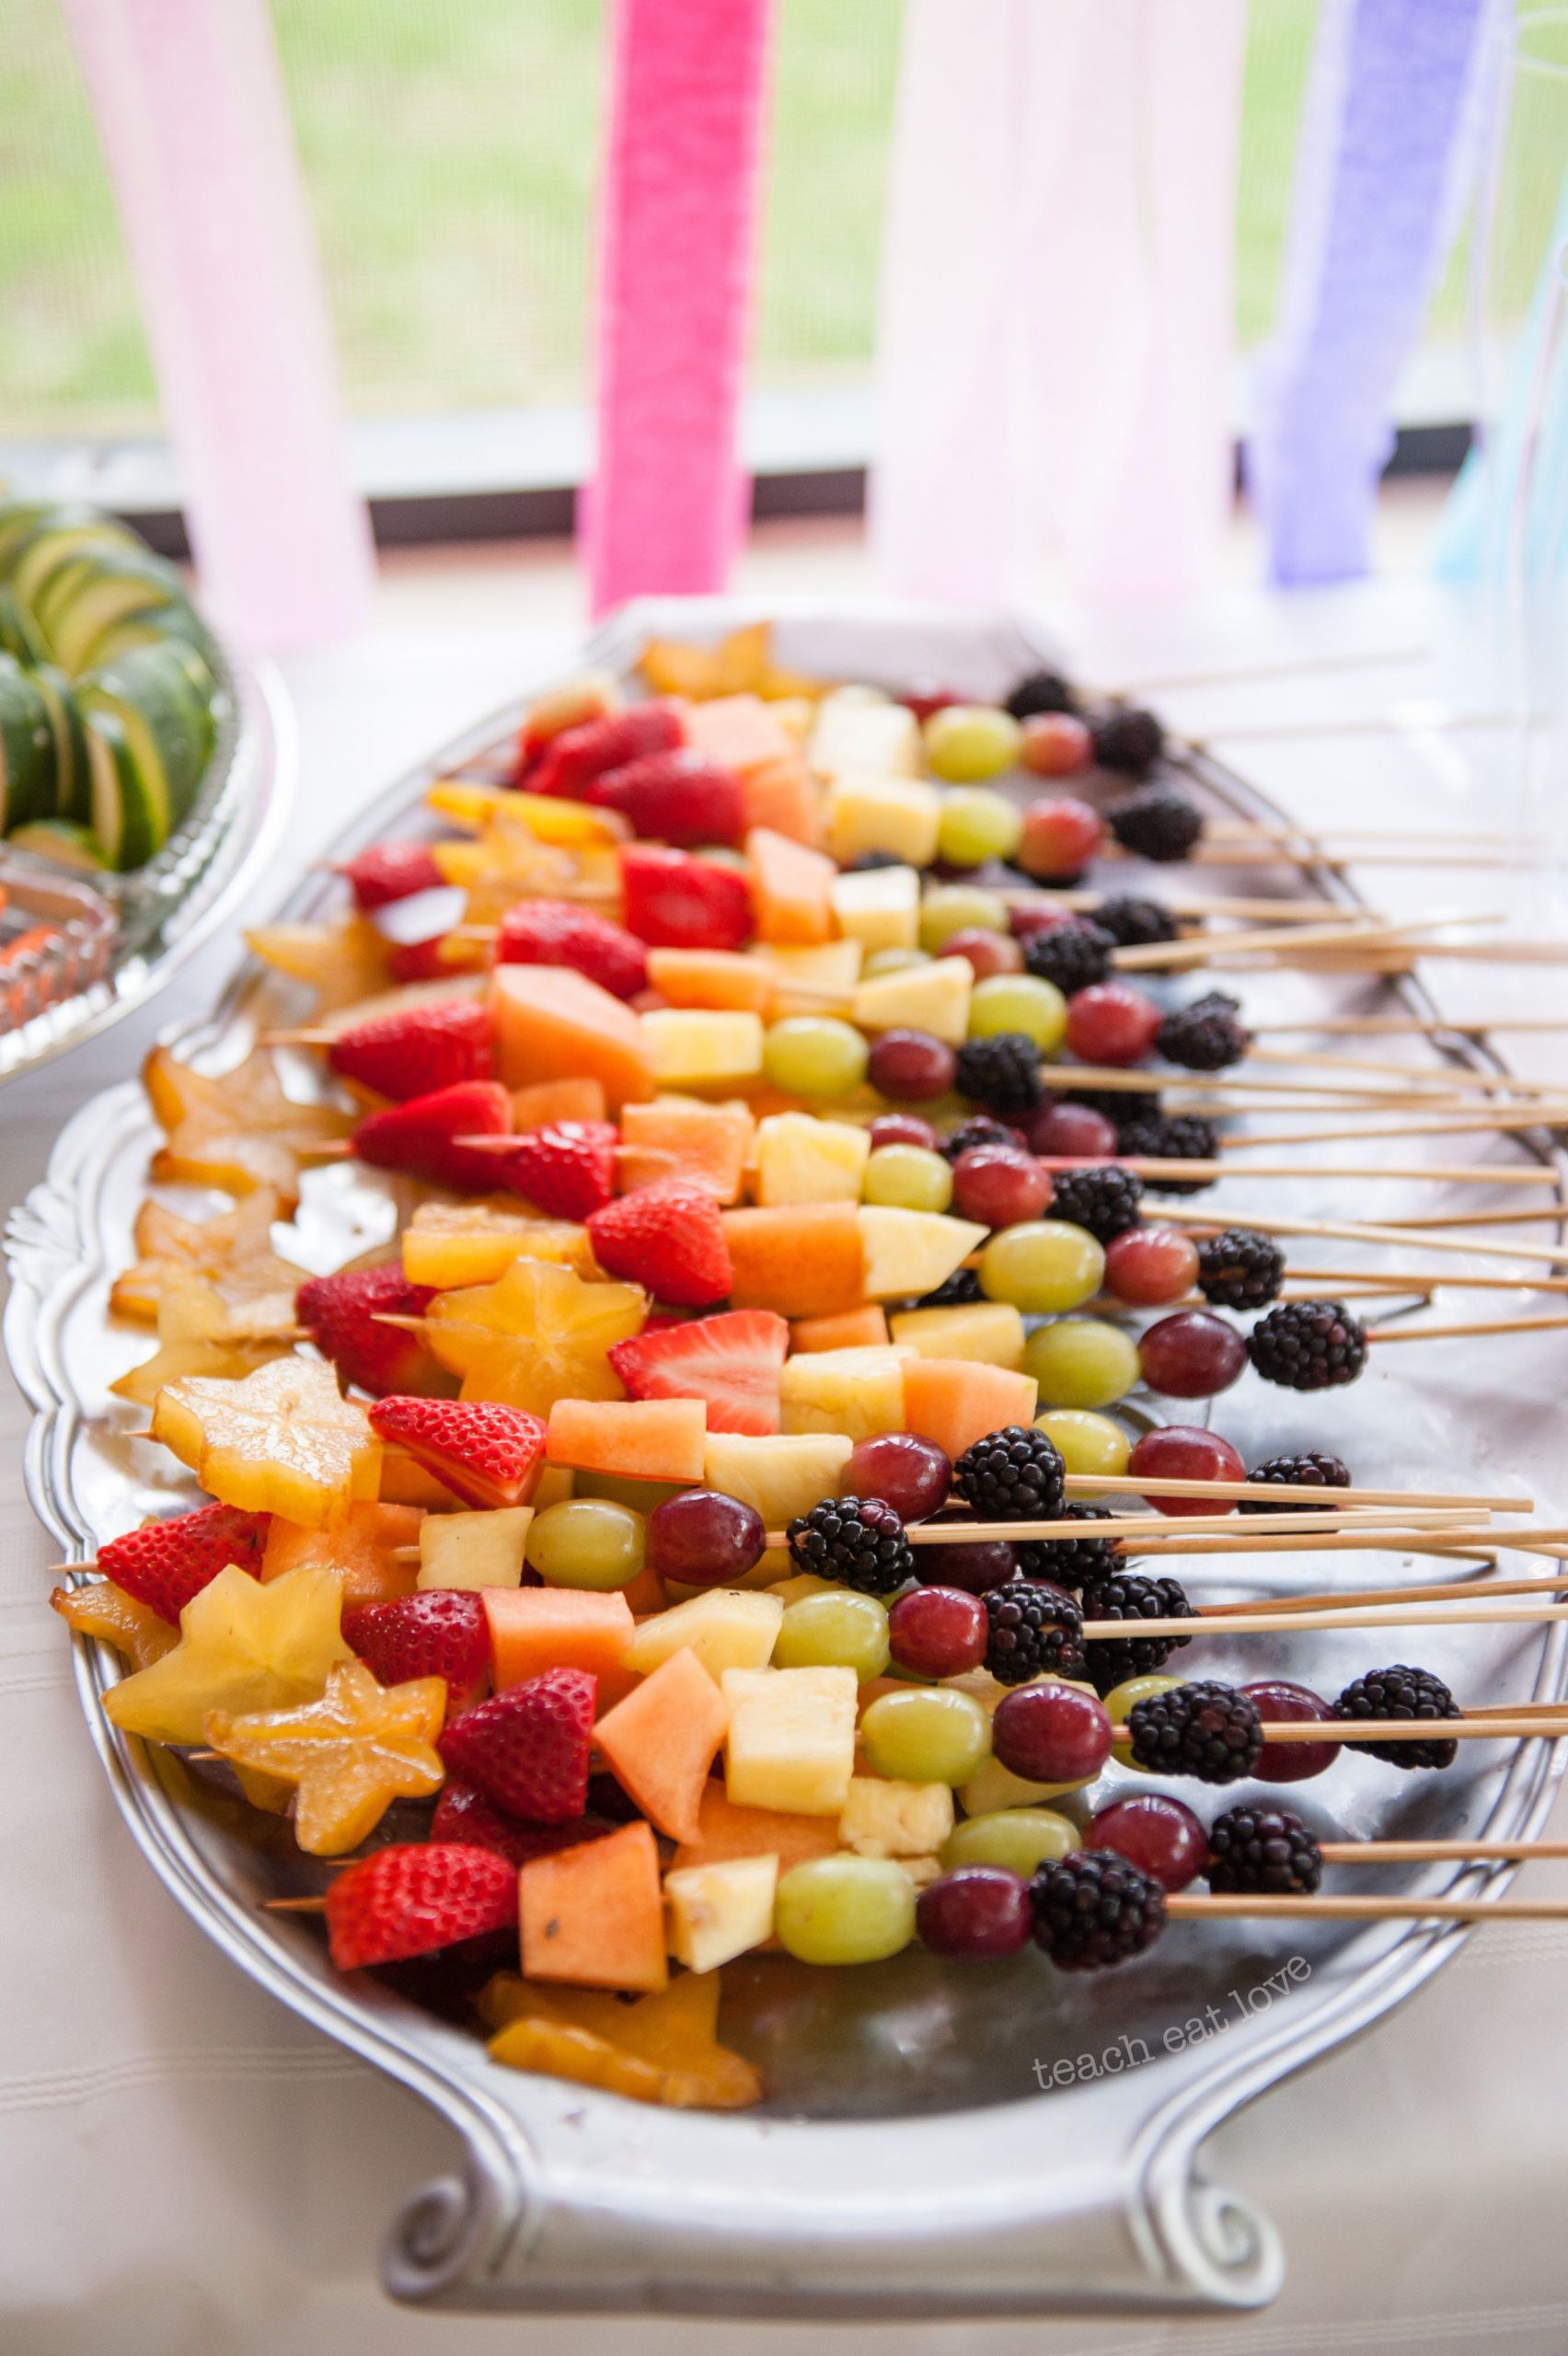 Party Food Ideas For Birthday
 The Baby’s First Birthday Recipe Round up and Fruit